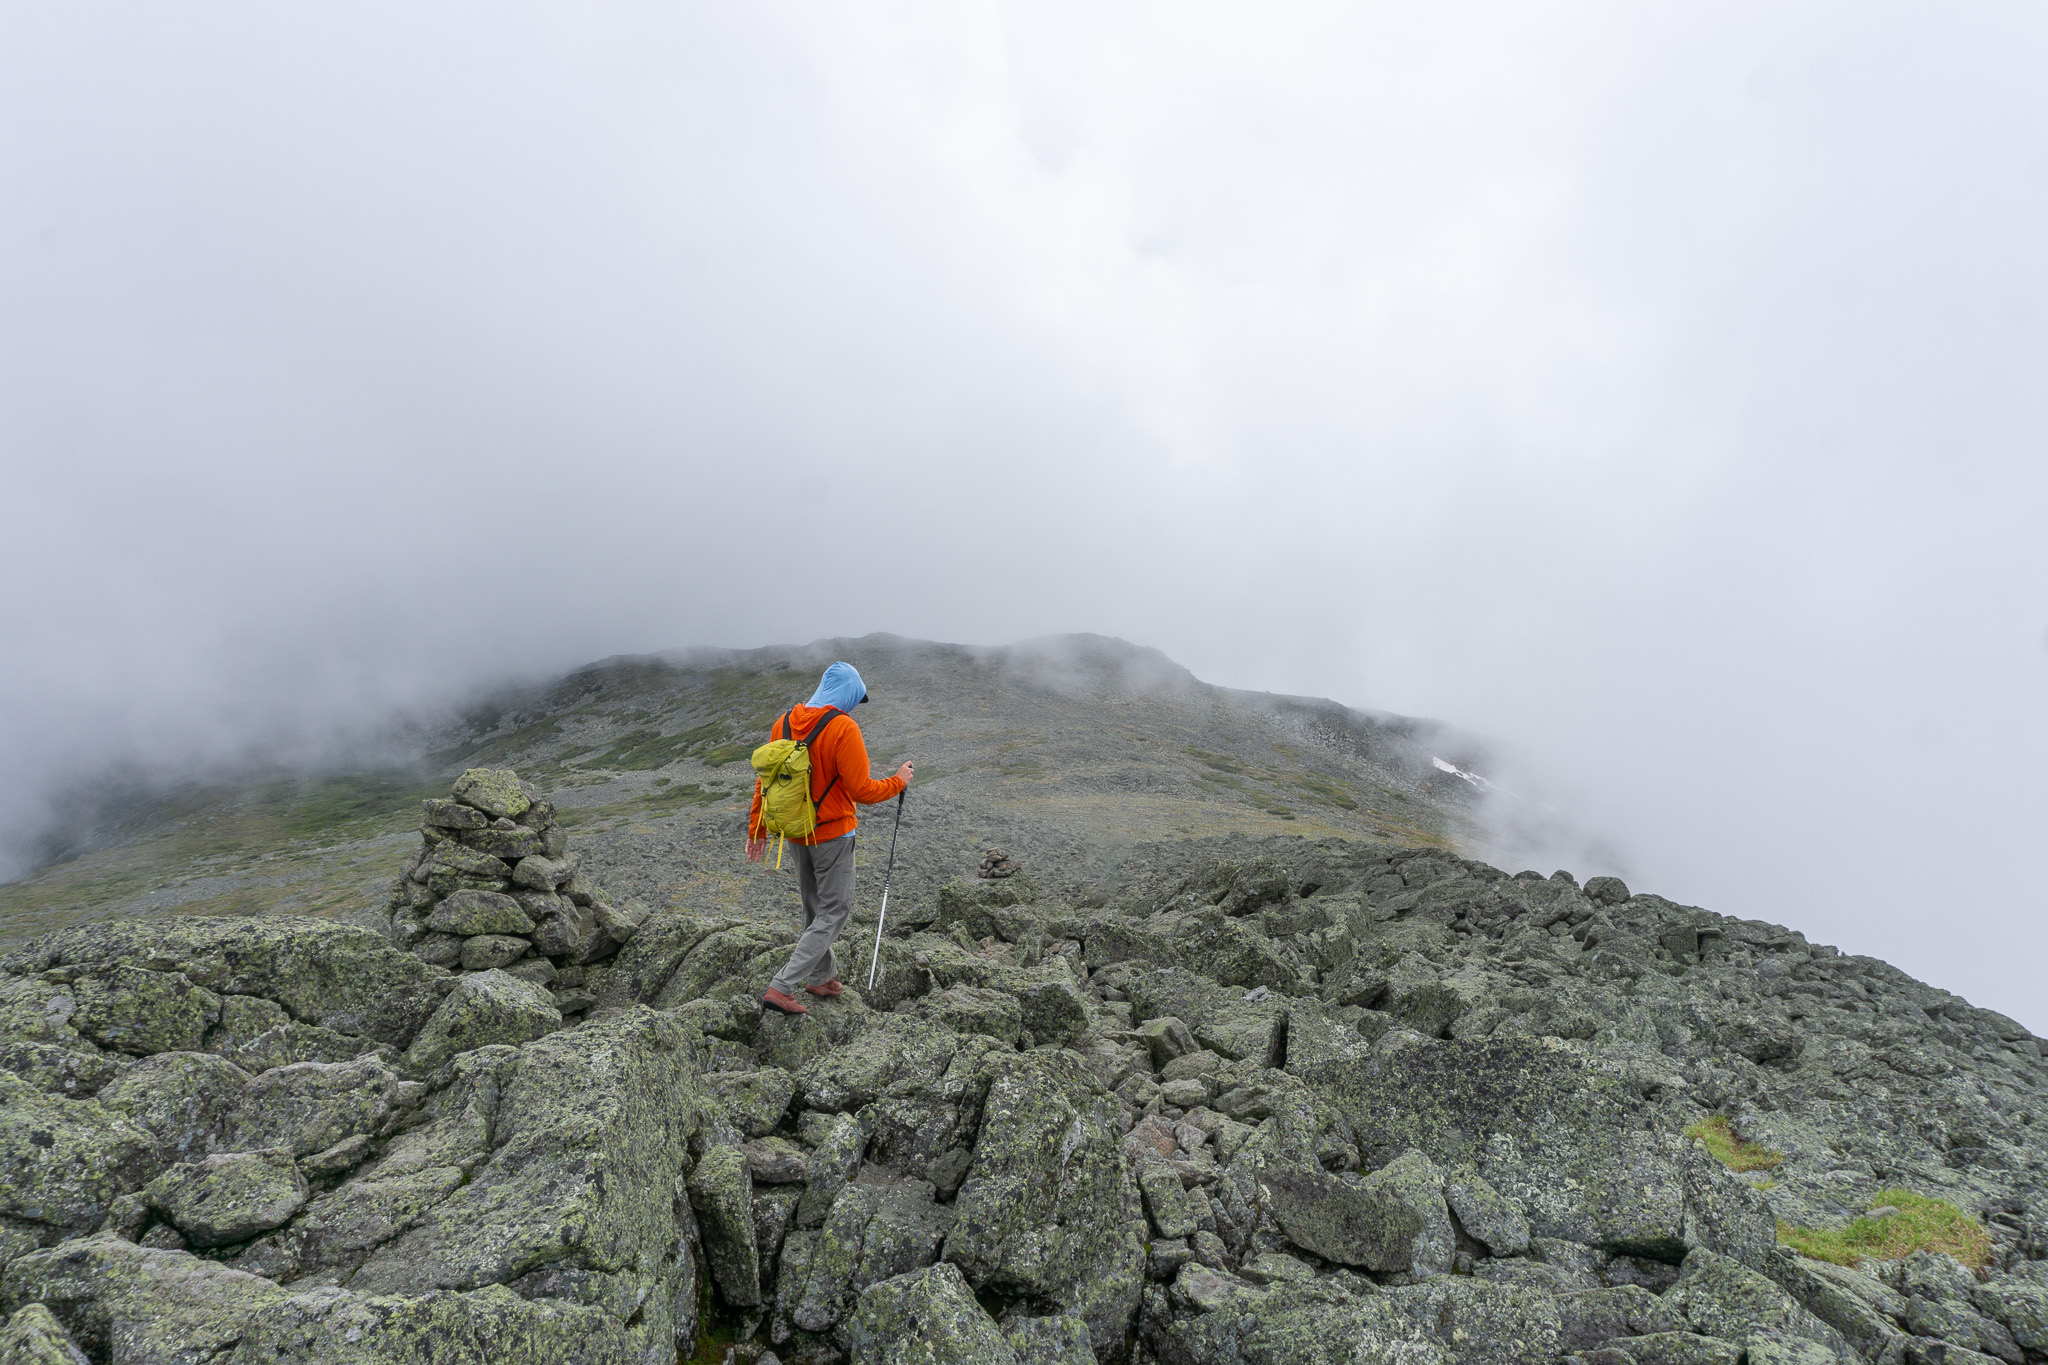 Descending from the summit of Mount Adams 